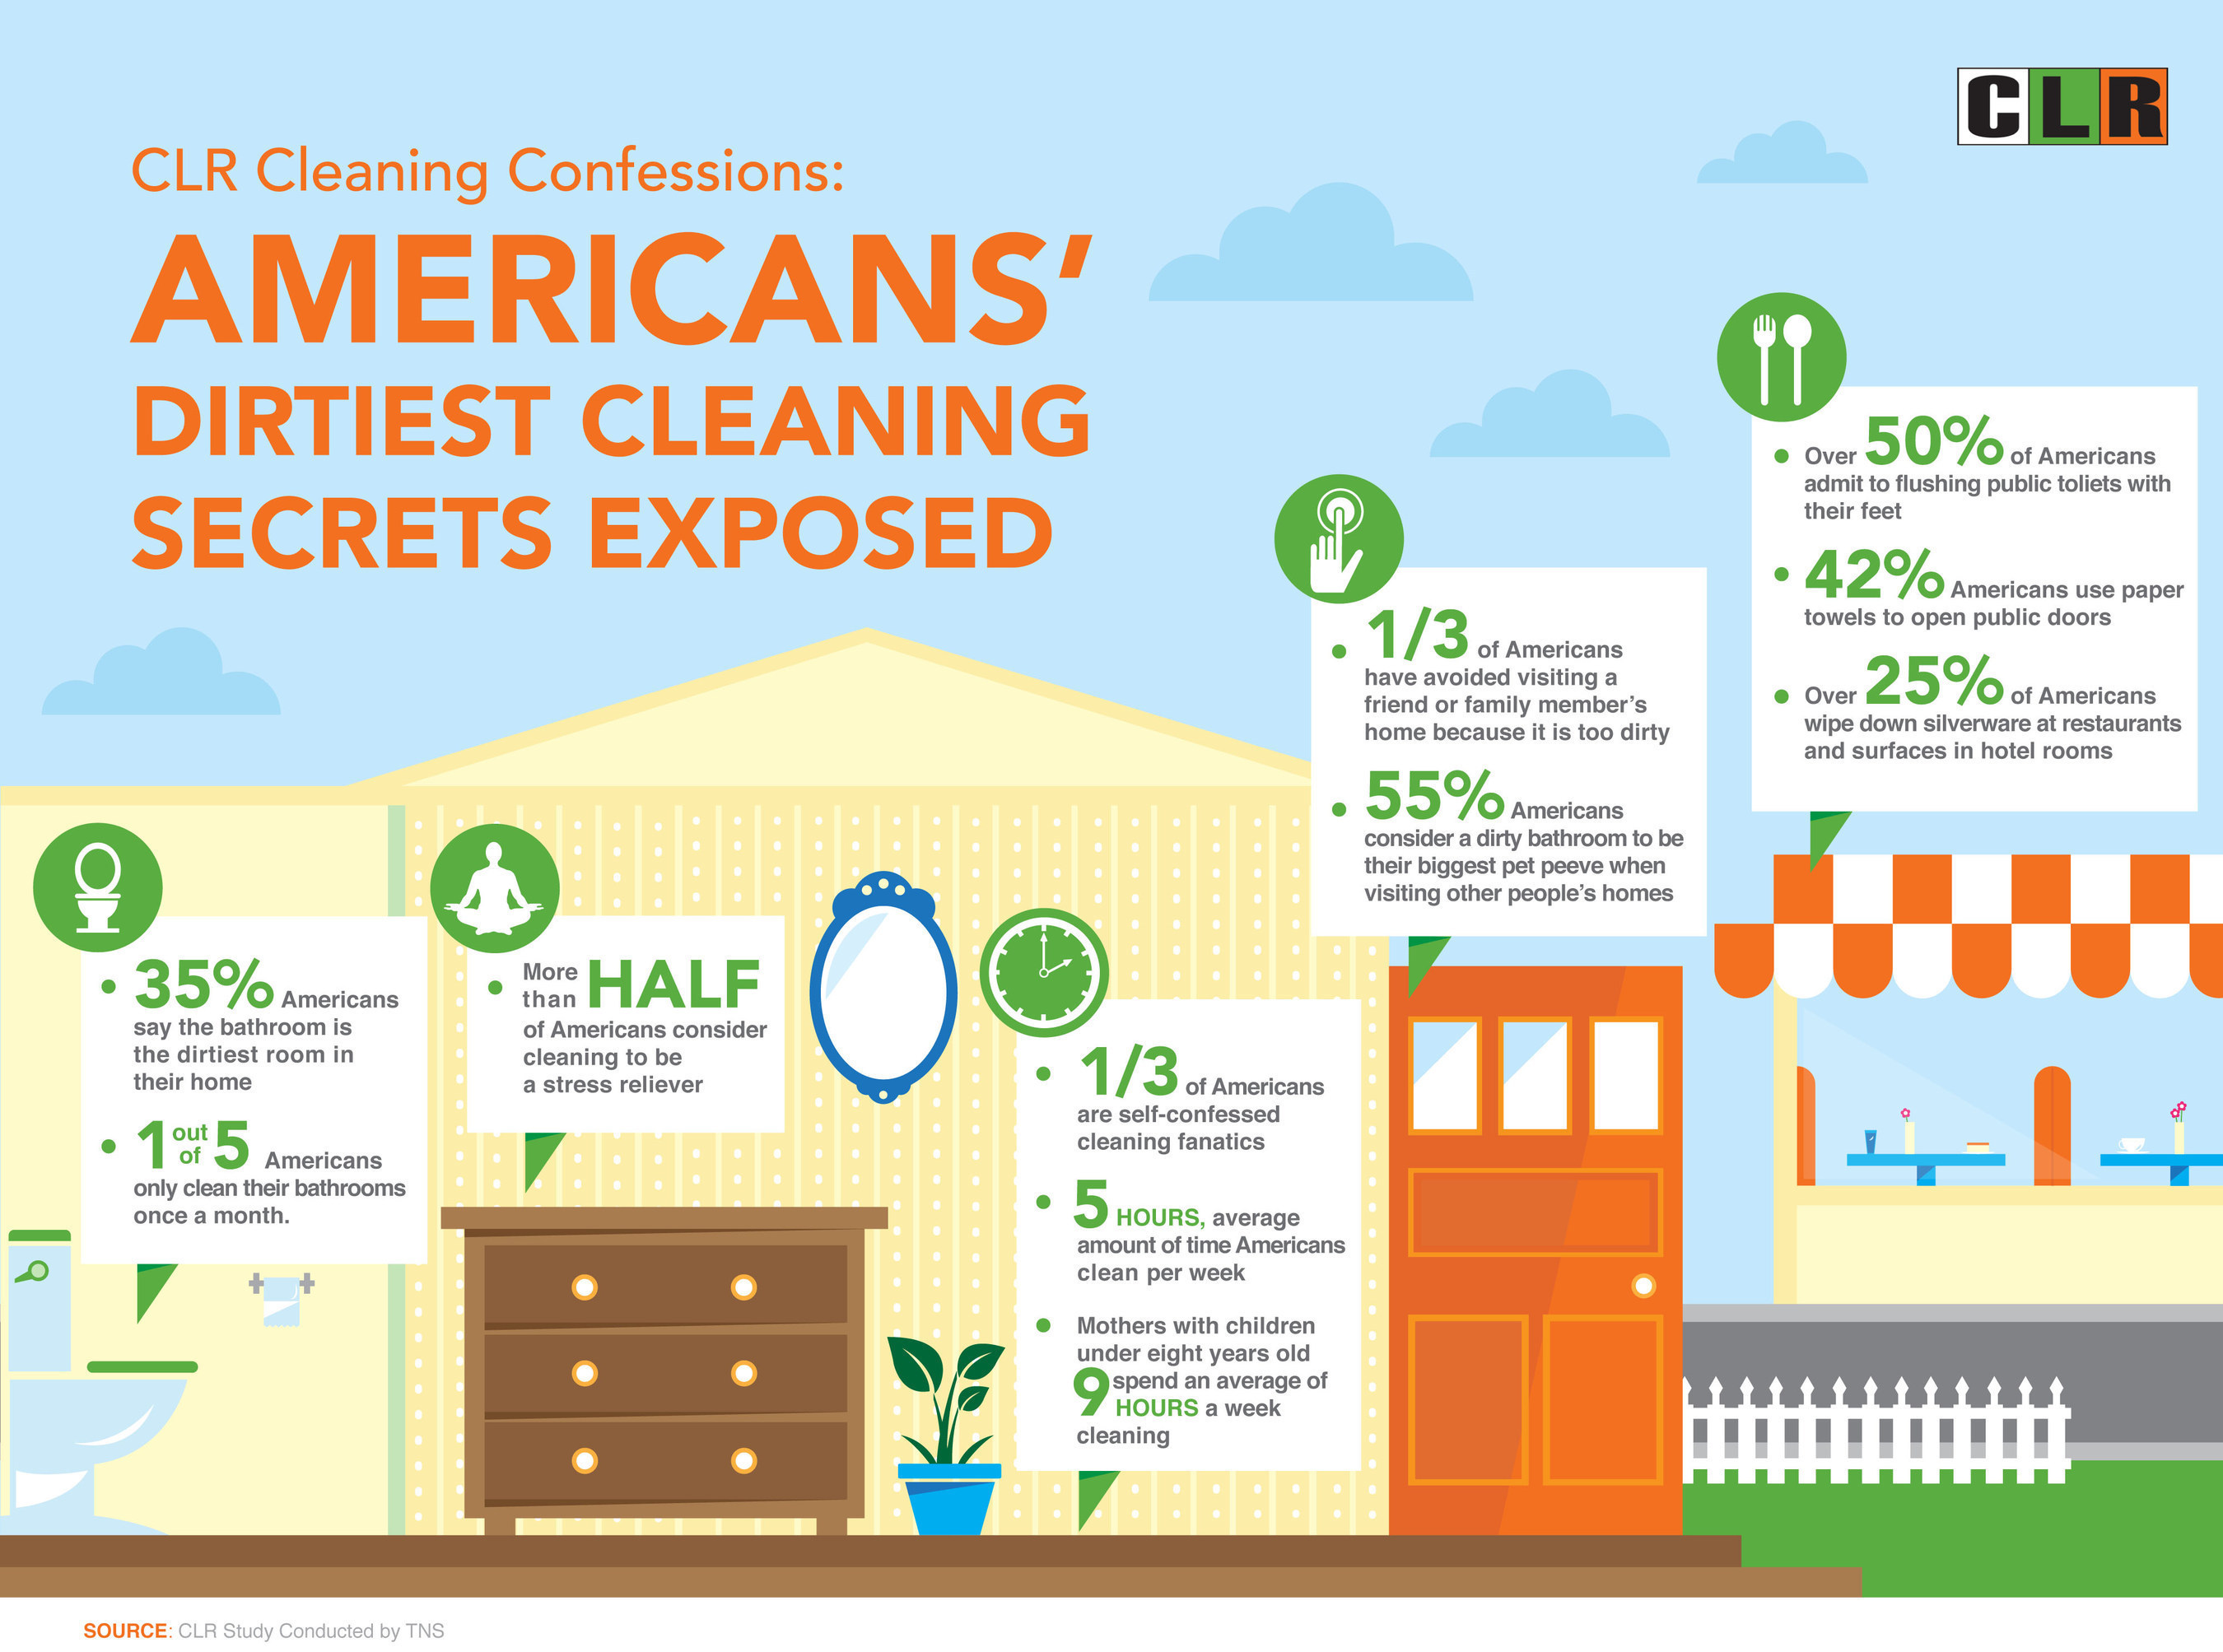 CLR Cleaning Confessions: Americans' Dirtiest Cleaning Secrets Exposed. (PRNewsFoto/Jelmar, Inc.)